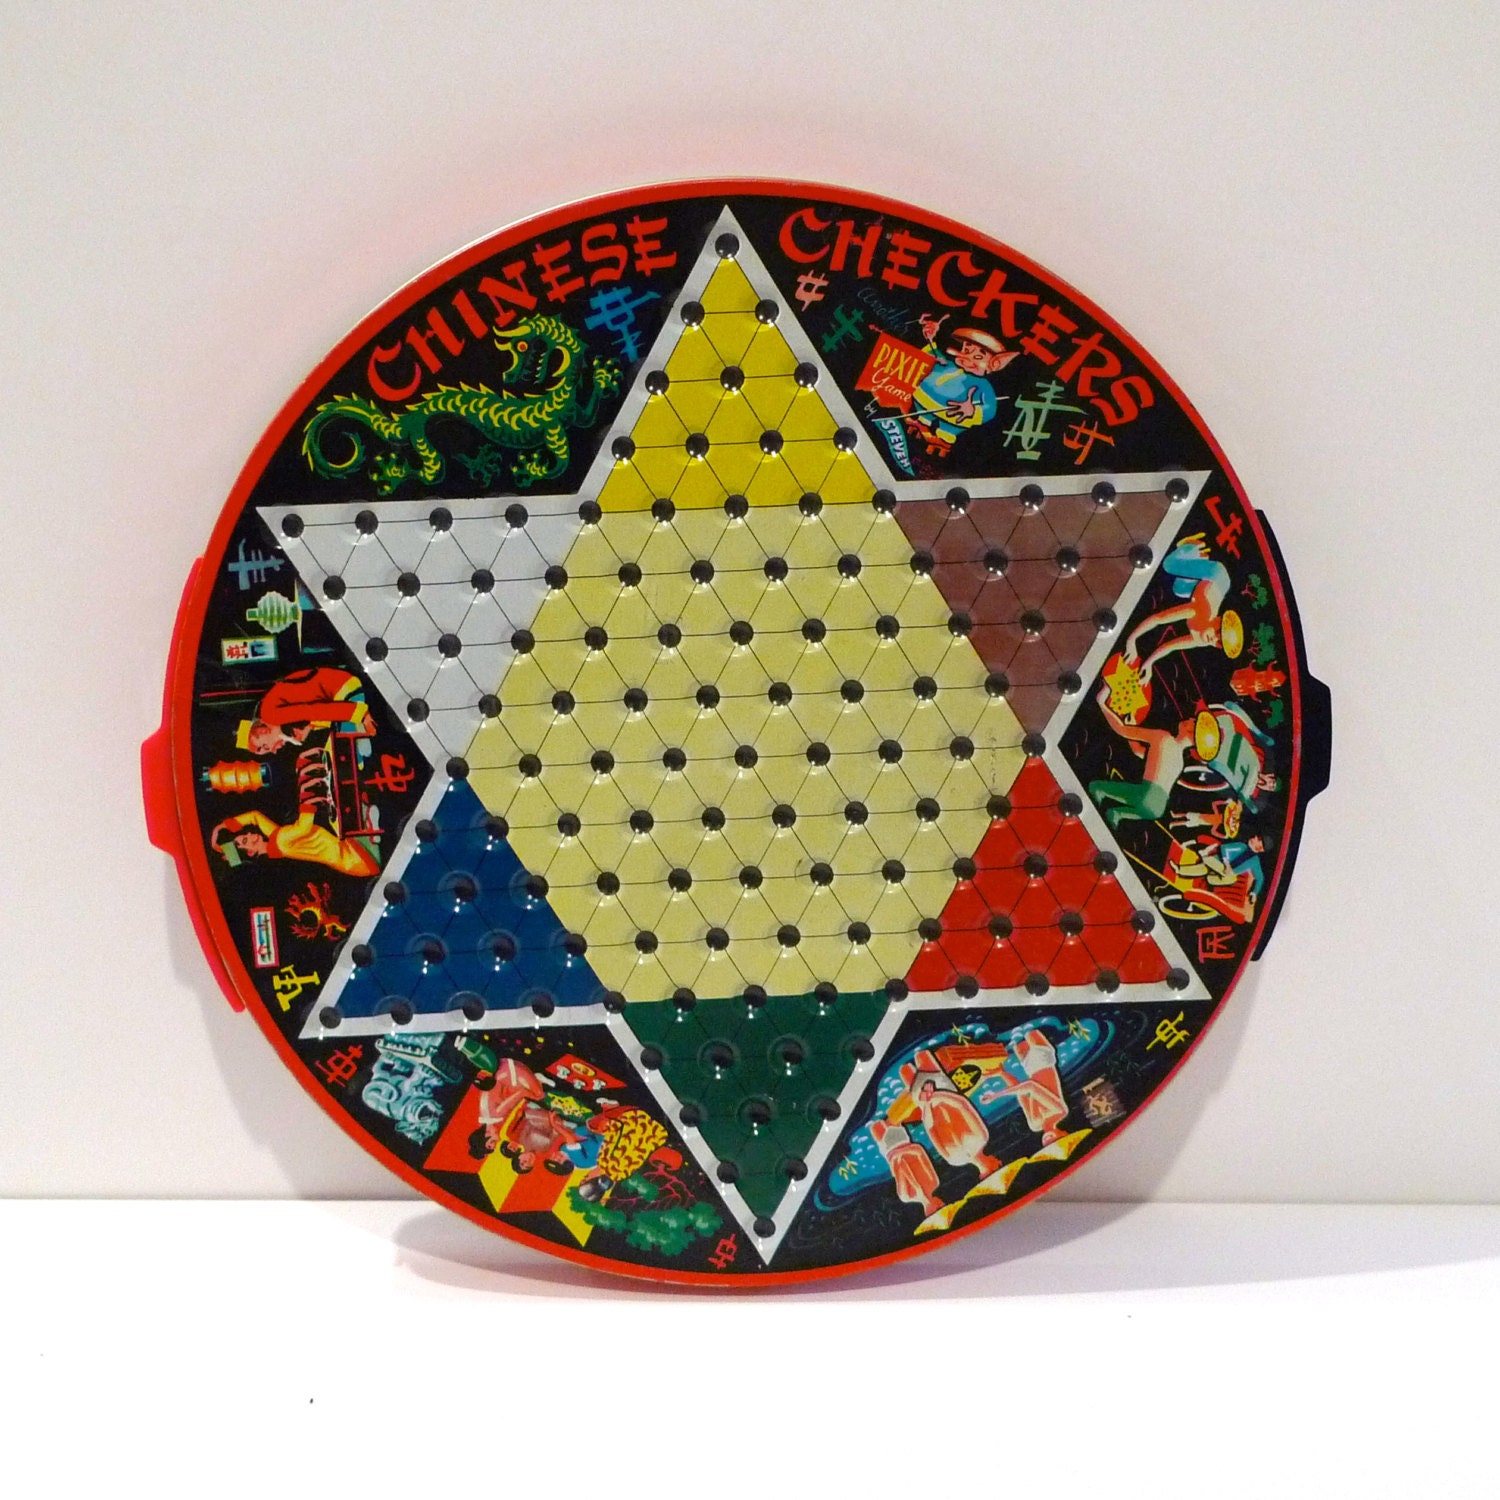 Vintage chinese checkers board game